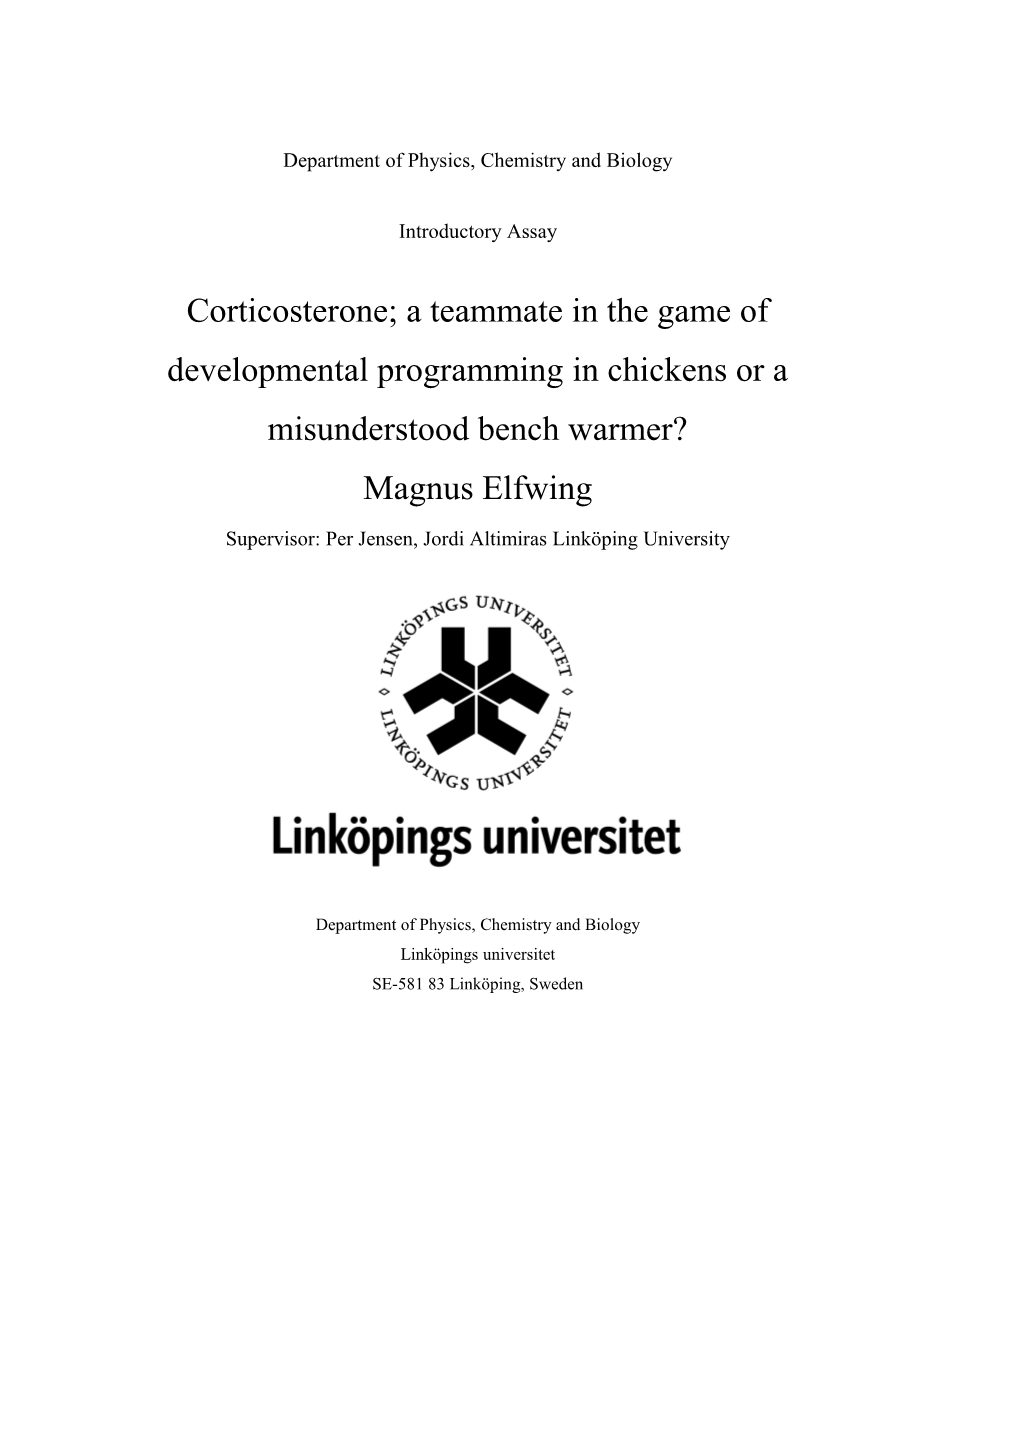 Introduction Paper Corticosterone, a Teammate in the Game of Developmental Programming